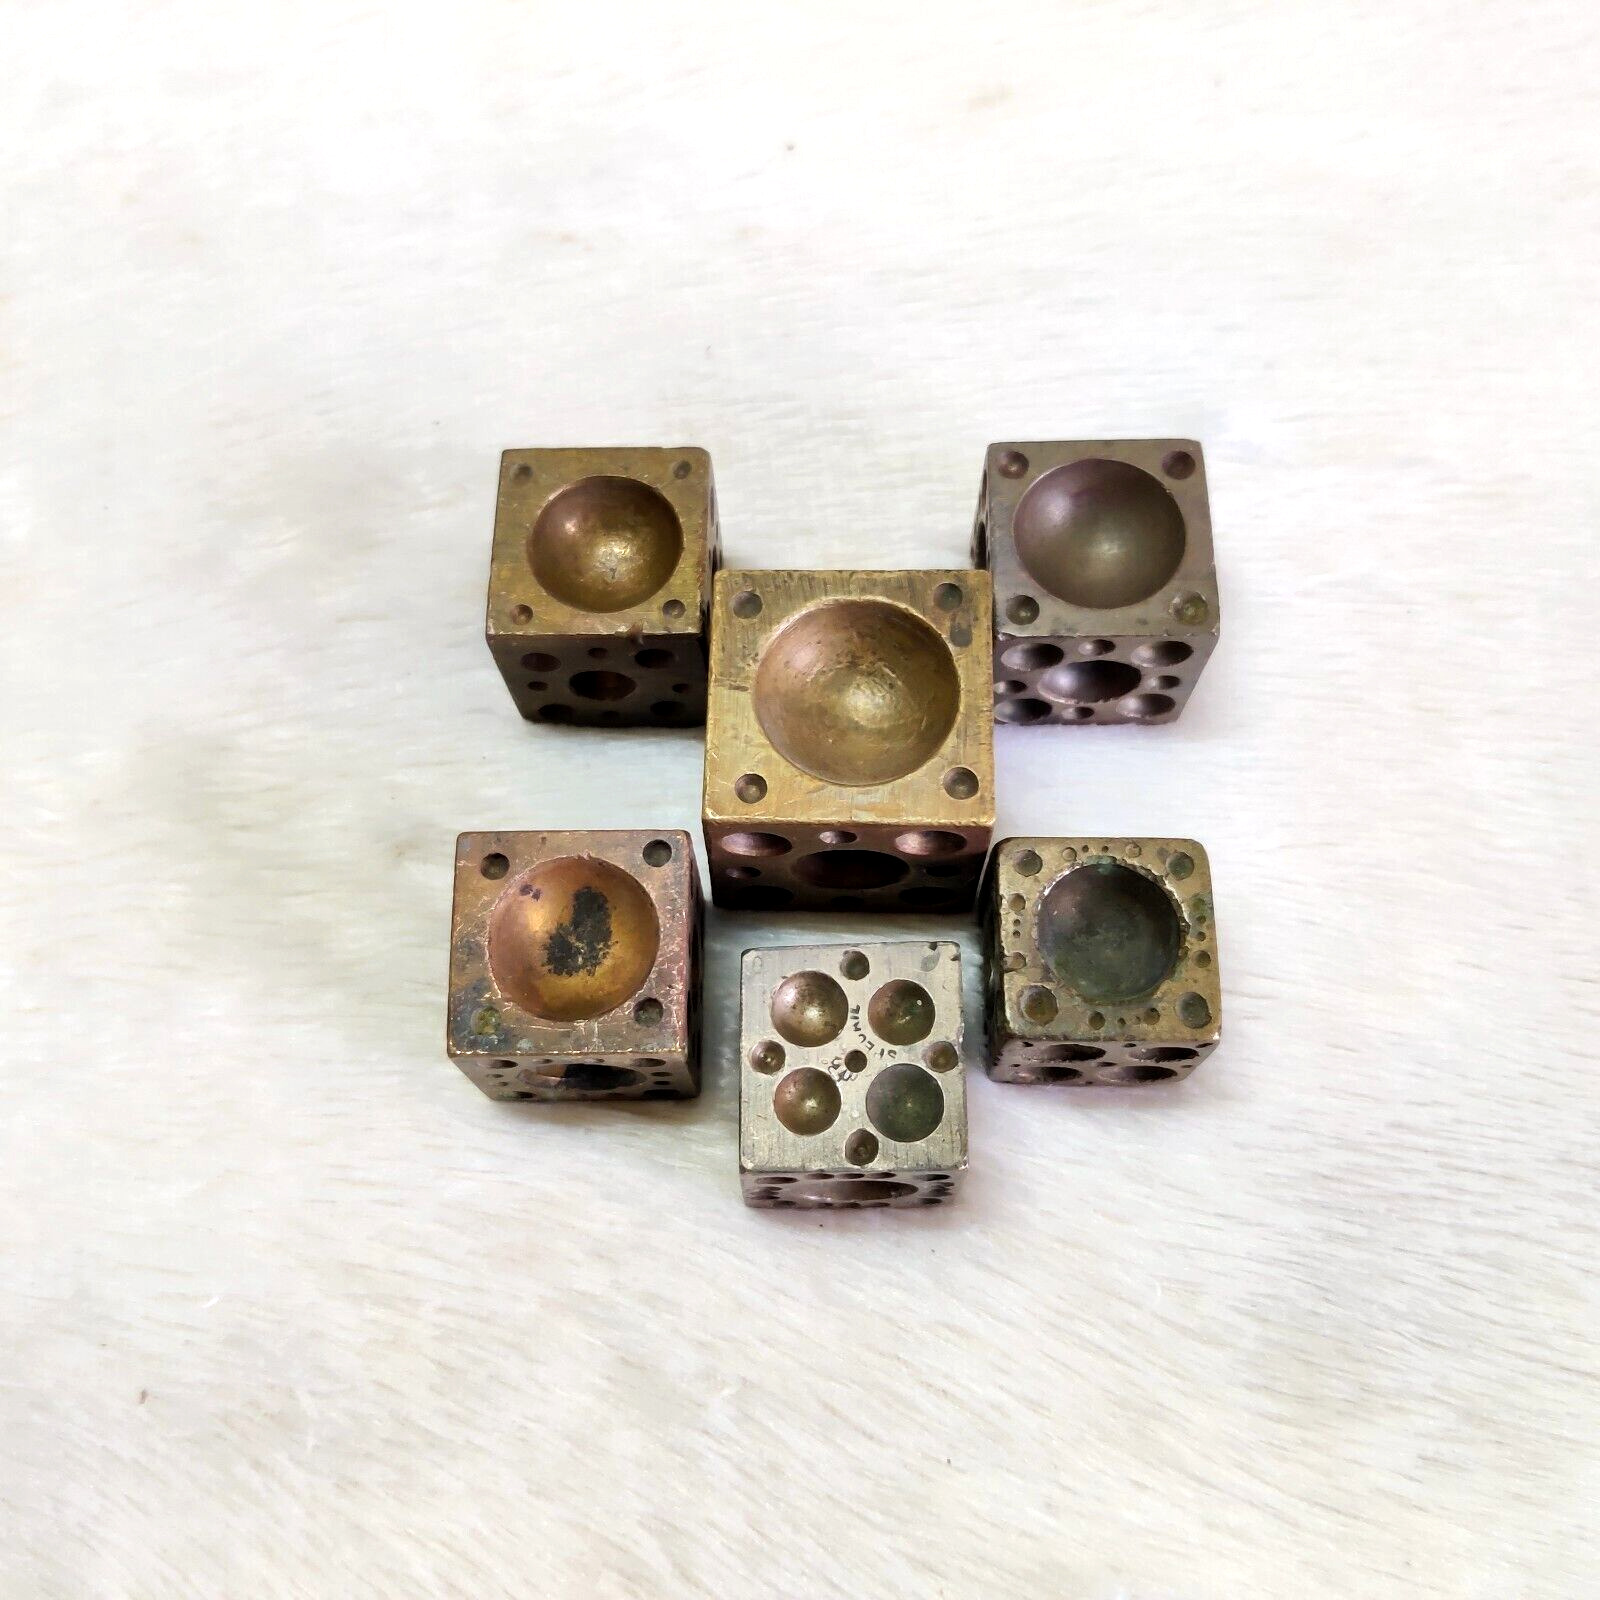 Vintage Dice Shape Brass Goldsmith Jewelry Stamp Decorative Collectible 6Pc M553